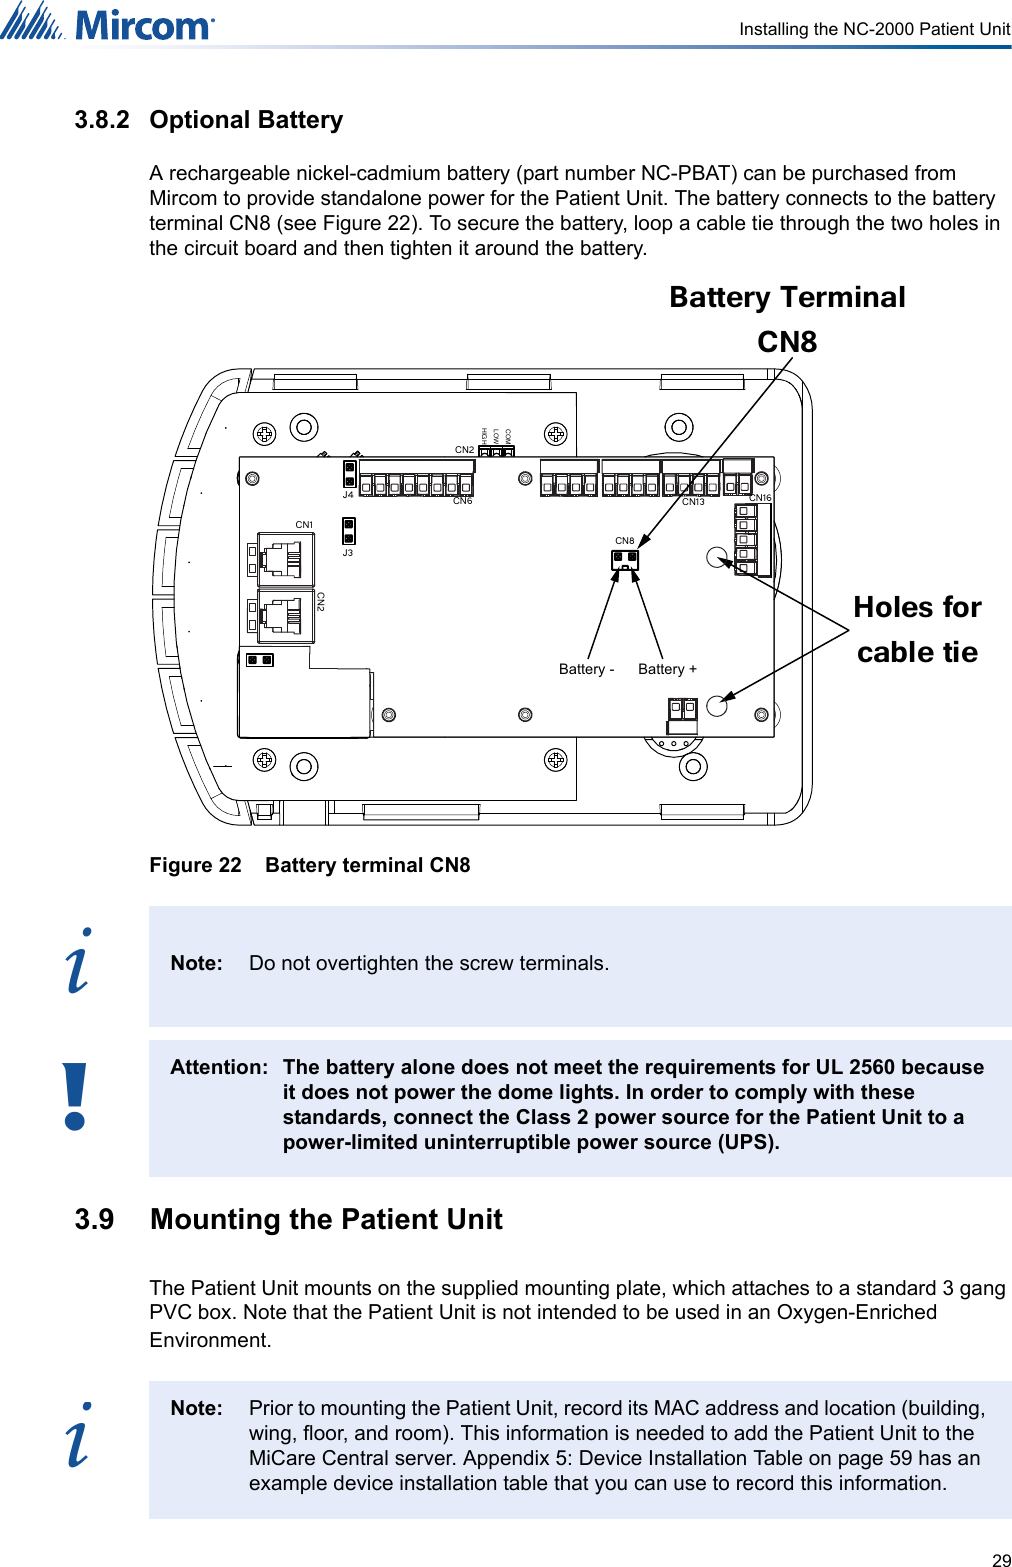 29Installing the NC-2000 Patient Unit3.8.2 Optional BatteryA rechargeable nickel-cadmium battery (part number NC-PBAT) can be purchased from Mircom to provide standalone power for the Patient Unit. The battery connects to the battery terminal CN8 (see Figure 22). To secure the battery, loop a cable tie through the two holes in the circuit board and then tighten it around the battery.Figure 22    Battery terminal CN83.9  Mounting the Patient UnitThe Patient Unit mounts on the supplied mounting plate, which attaches to a standard 3 gang PVC box. Note that the Patient Unit is not intended to be used in an Oxygen-Enriched Environment.Note: Do not overtighten the screw terminals.Attention: The battery alone does not meet the requirements for UL 2560 because it does not power the dome lights. In order to comply with these standards, connect the Class 2 power source for the Patient Unit to a power-limited uninterruptible power source (UPS).Note: Prior to mounting the Patient Unit, record its MAC address and location (building, wing, floor, and room). This information is needed to add the Patient Unit to the MiCare Central server. Appendix 5: Device Installation Table on page 59 has an example device installation table that you can use to record this information.J3J4COMLOWHIGHCN16CN13CN6CN2CN1CN2CN8Battery Terminal CN8 Holes for cable tie Battery - Battery +i!i